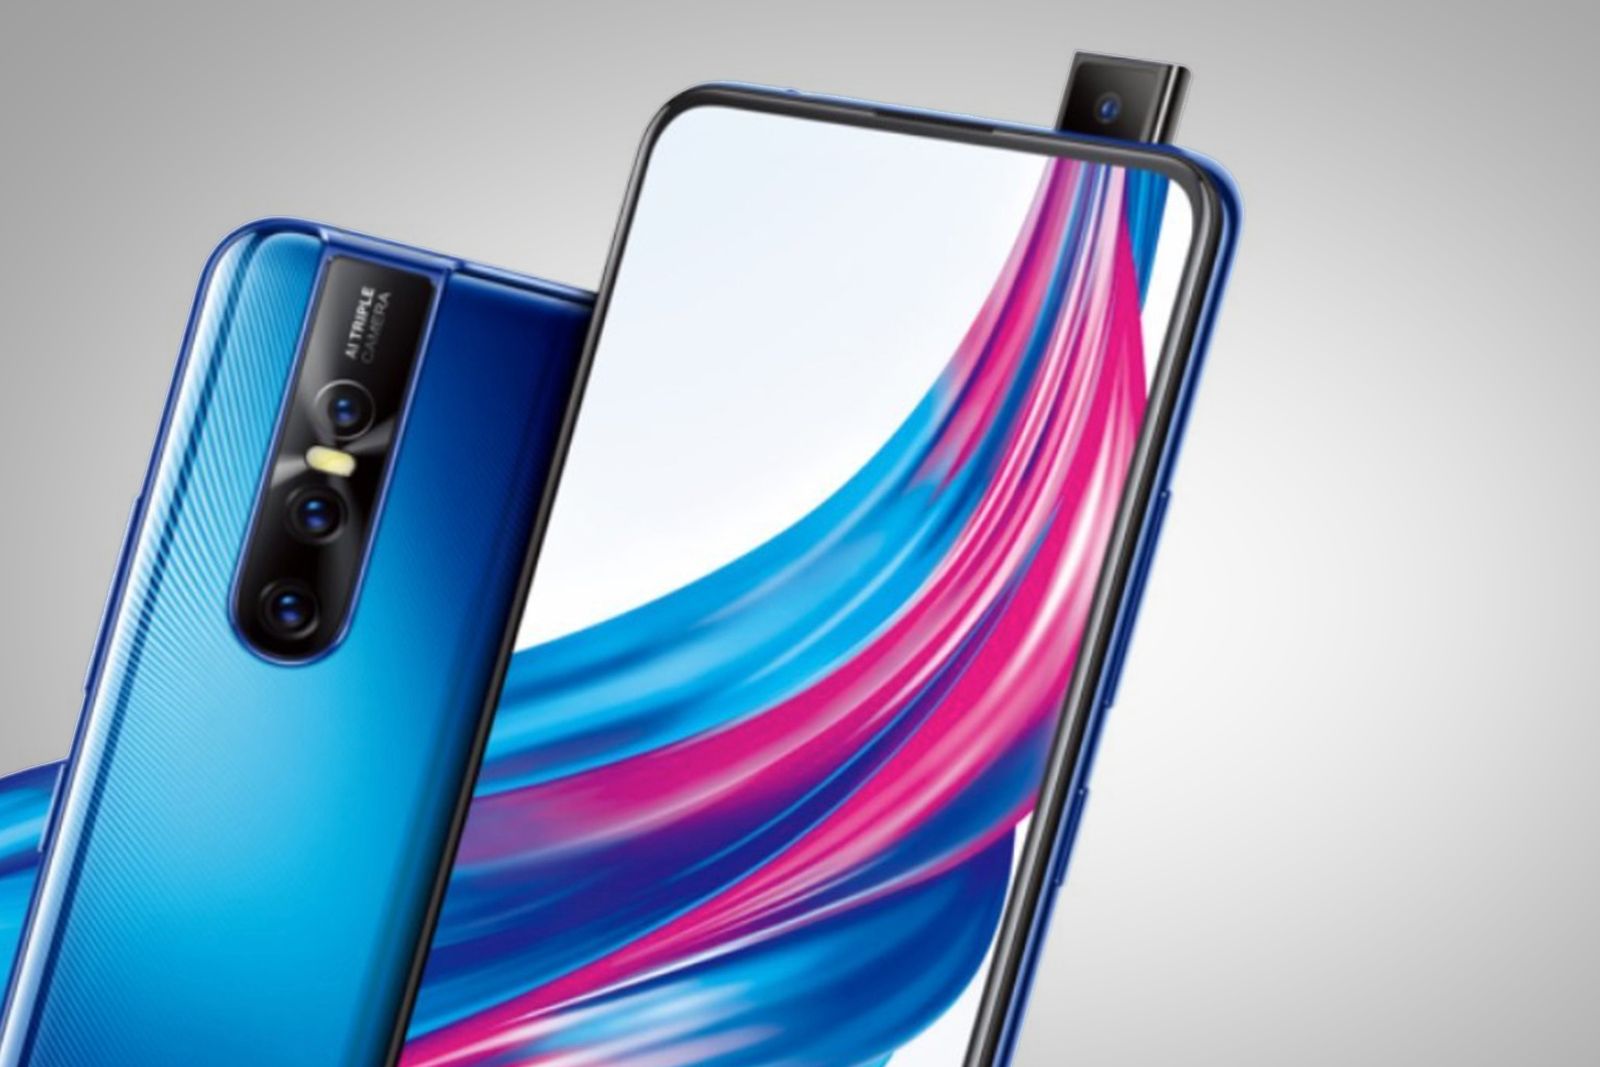 Vivo will unveil V15 Pro phone with 32MP pop-up camera at MWC 2019 image 1